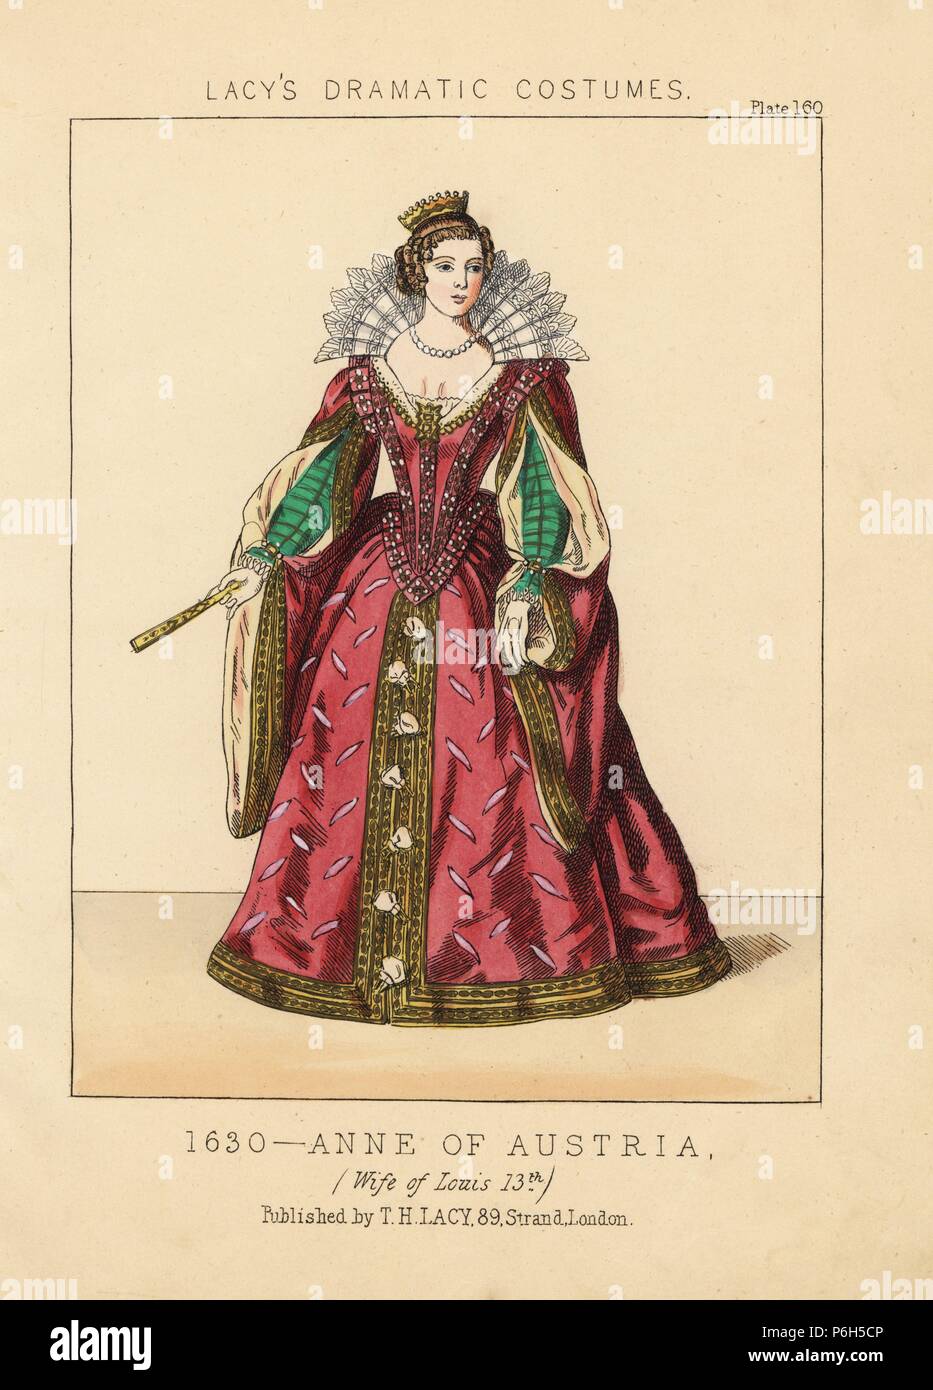 Anne of Austria (wife of Louis XIII and mother of Louis XIV) and